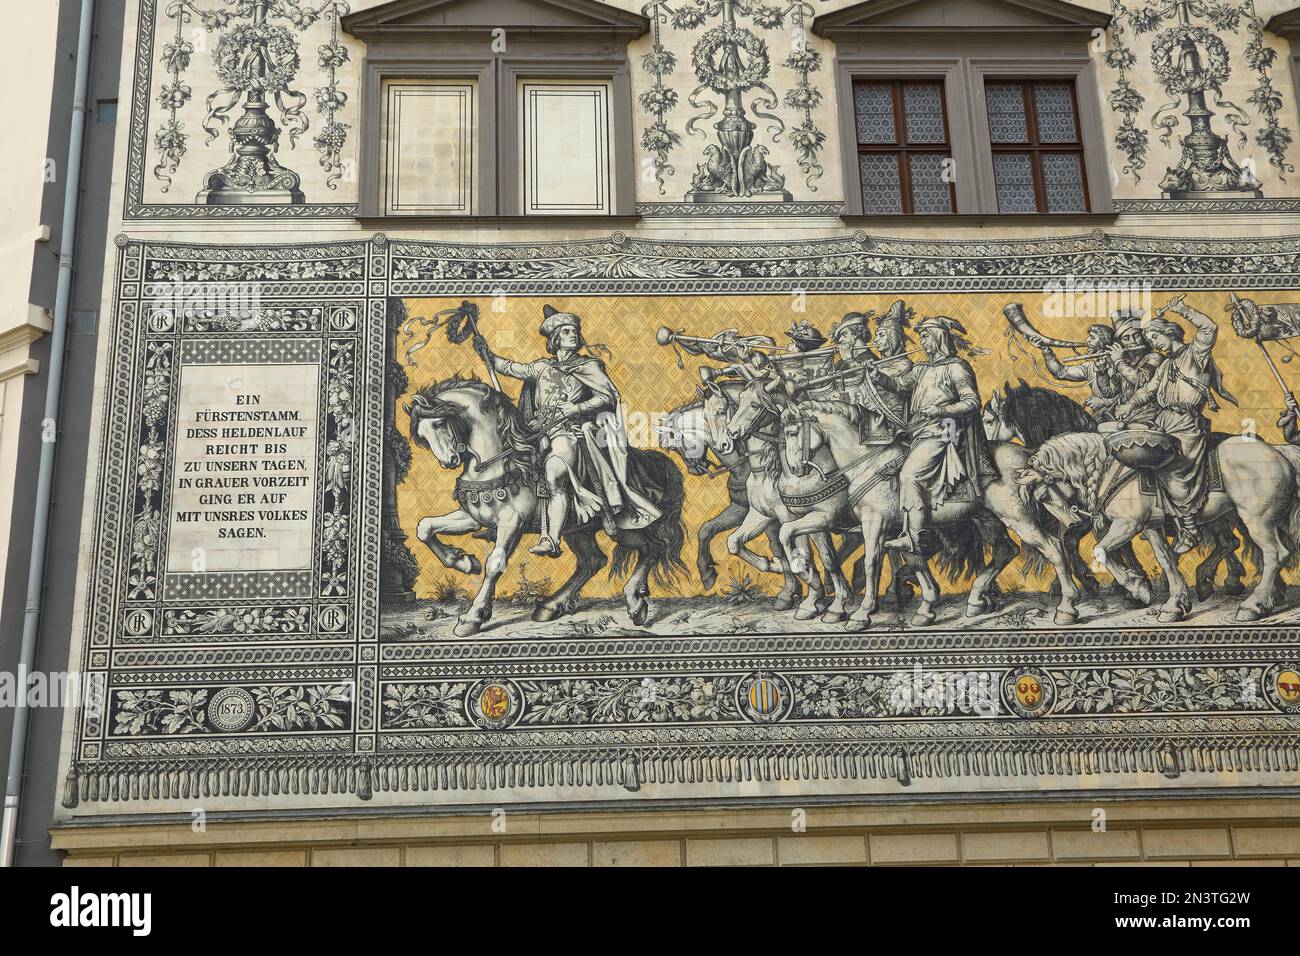 Porcelain Mural of Margraves, Dukes, Electors and Kings, Partial View, Dresden, Saxony, Germany Stock Photo